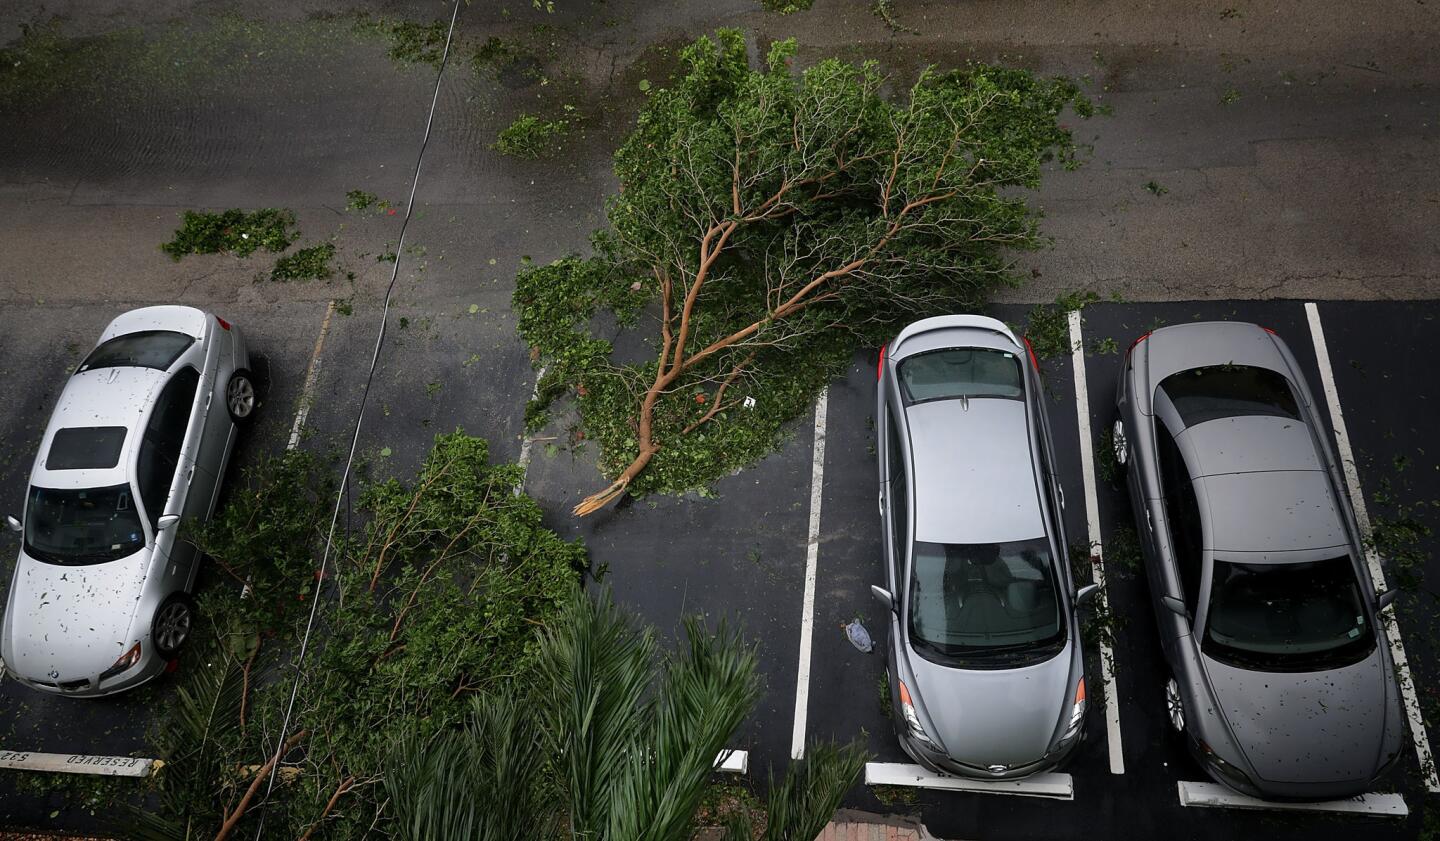 A tree branch felled by tropical storm winds narrowly misses parked cars as Hurricane Irma hits the southern part of the state on Sept. 10, 2017, in Pompano Beach, Florida.